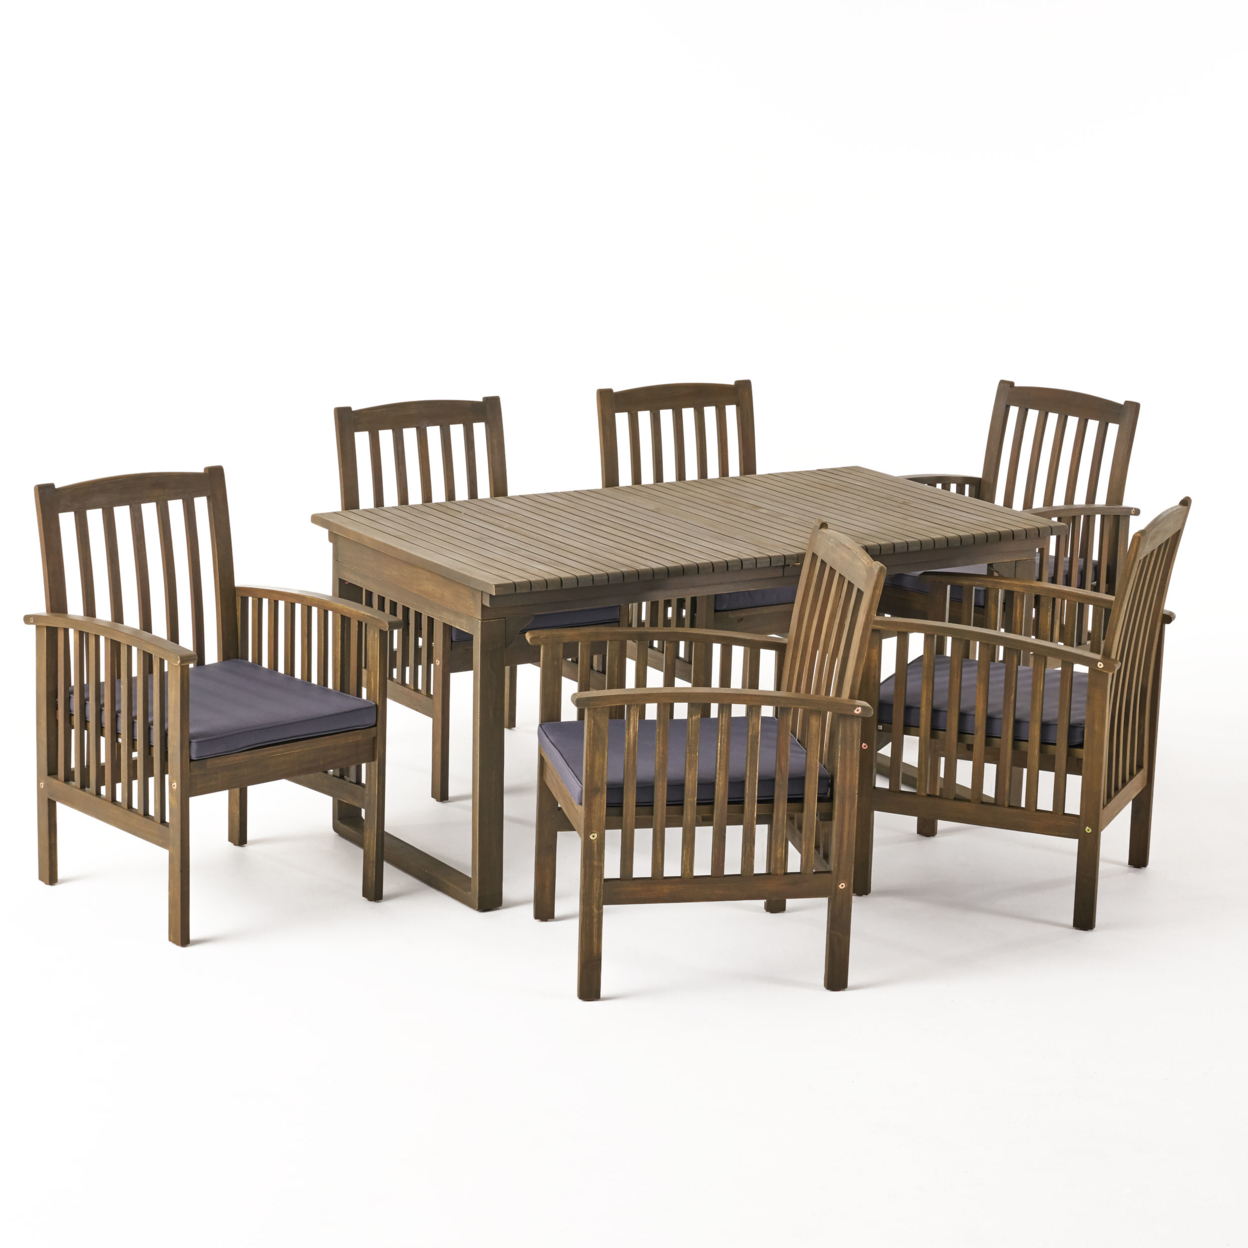 Aimee Outdoor 6 Seater Expandable Acacia Wood Dining Set